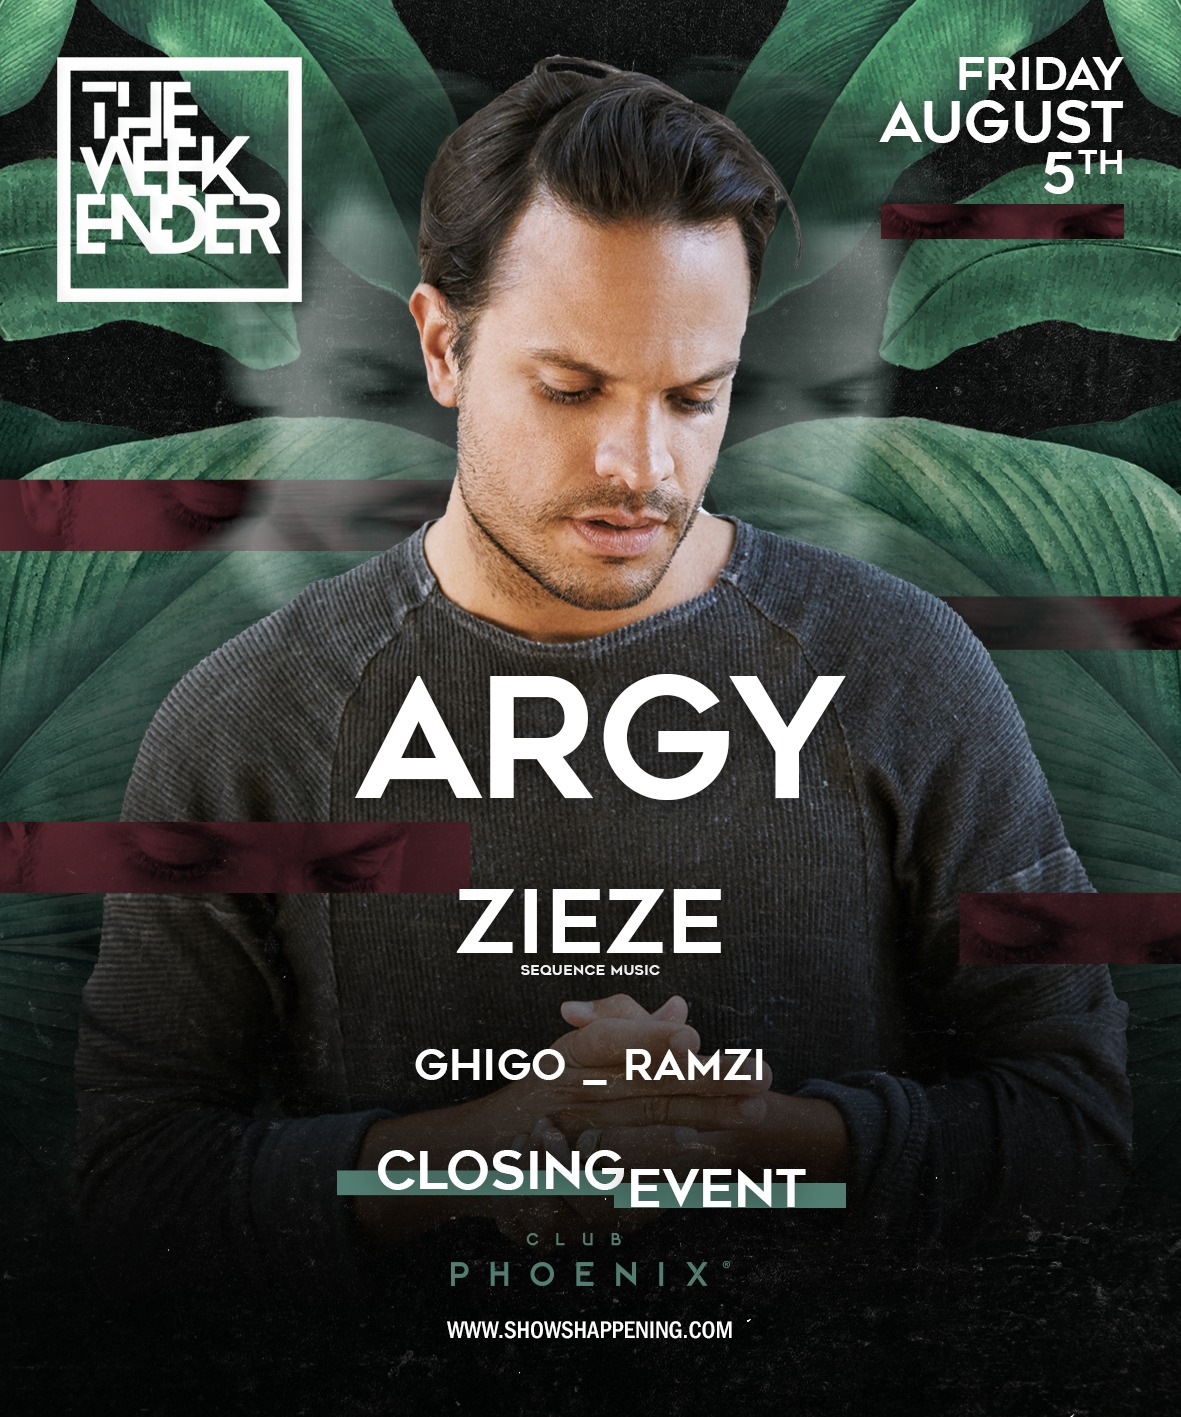 Argy - The Weekender - August 5th poster